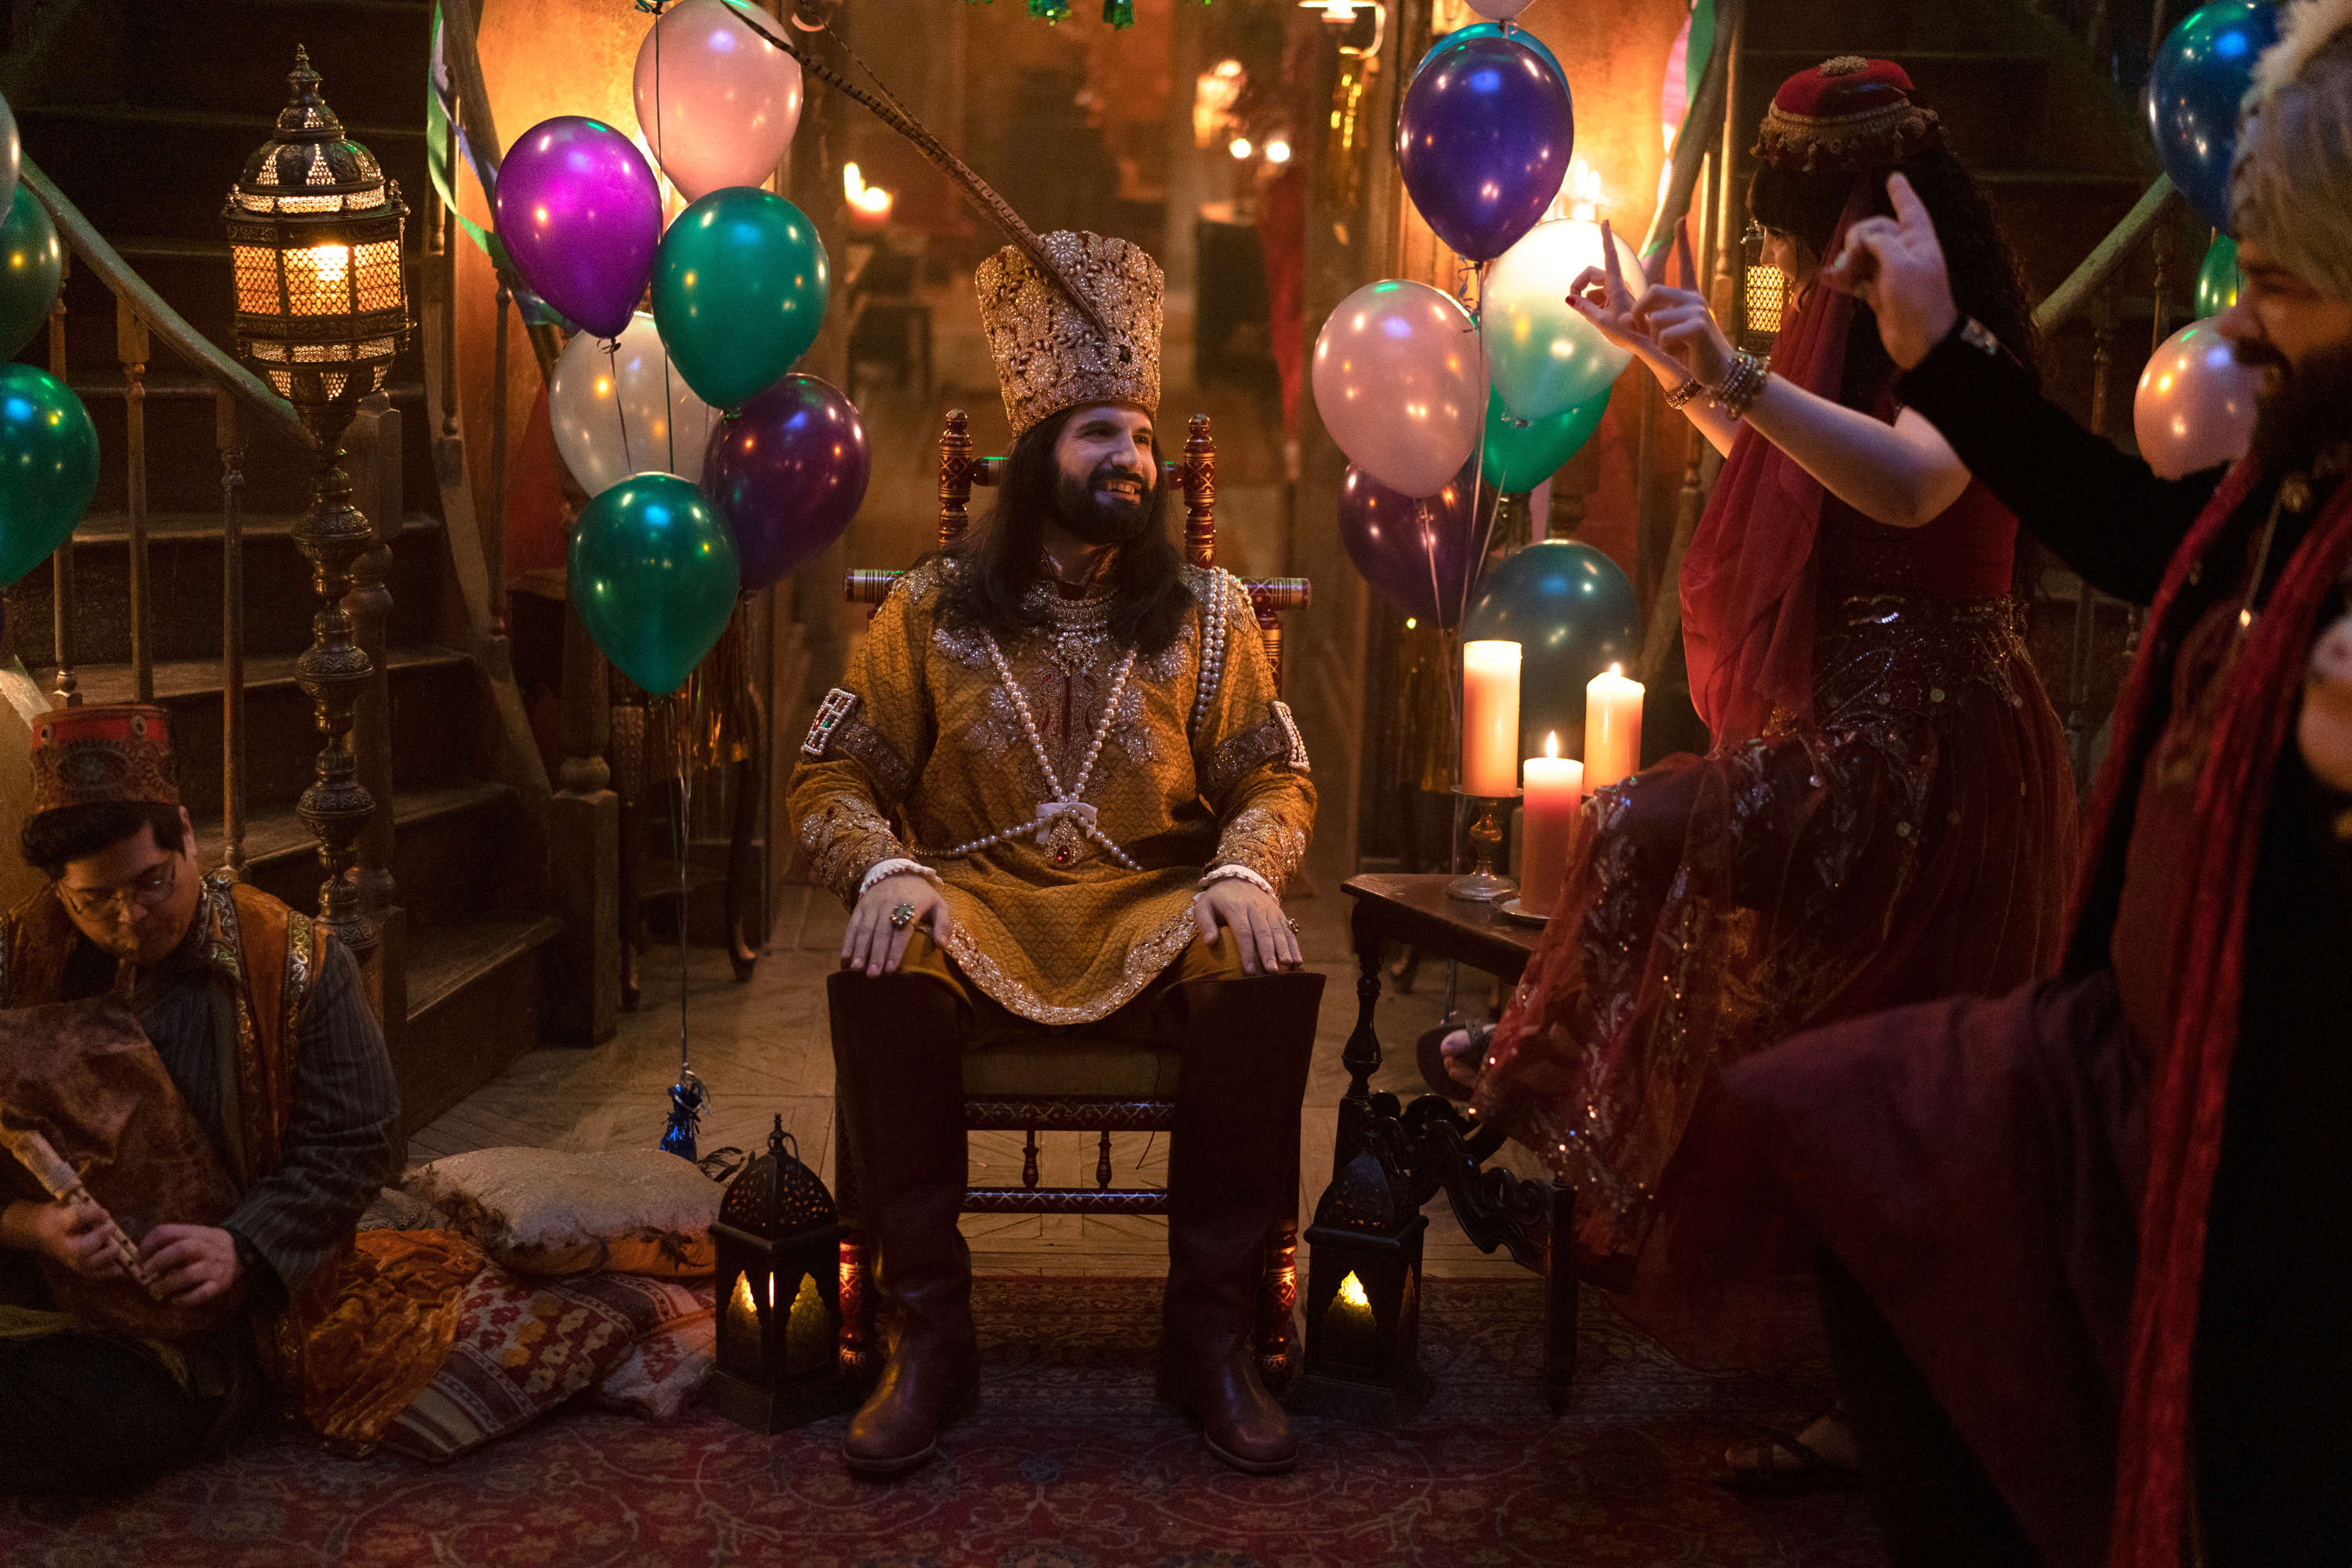 What We Do In the Shadows 308 Still